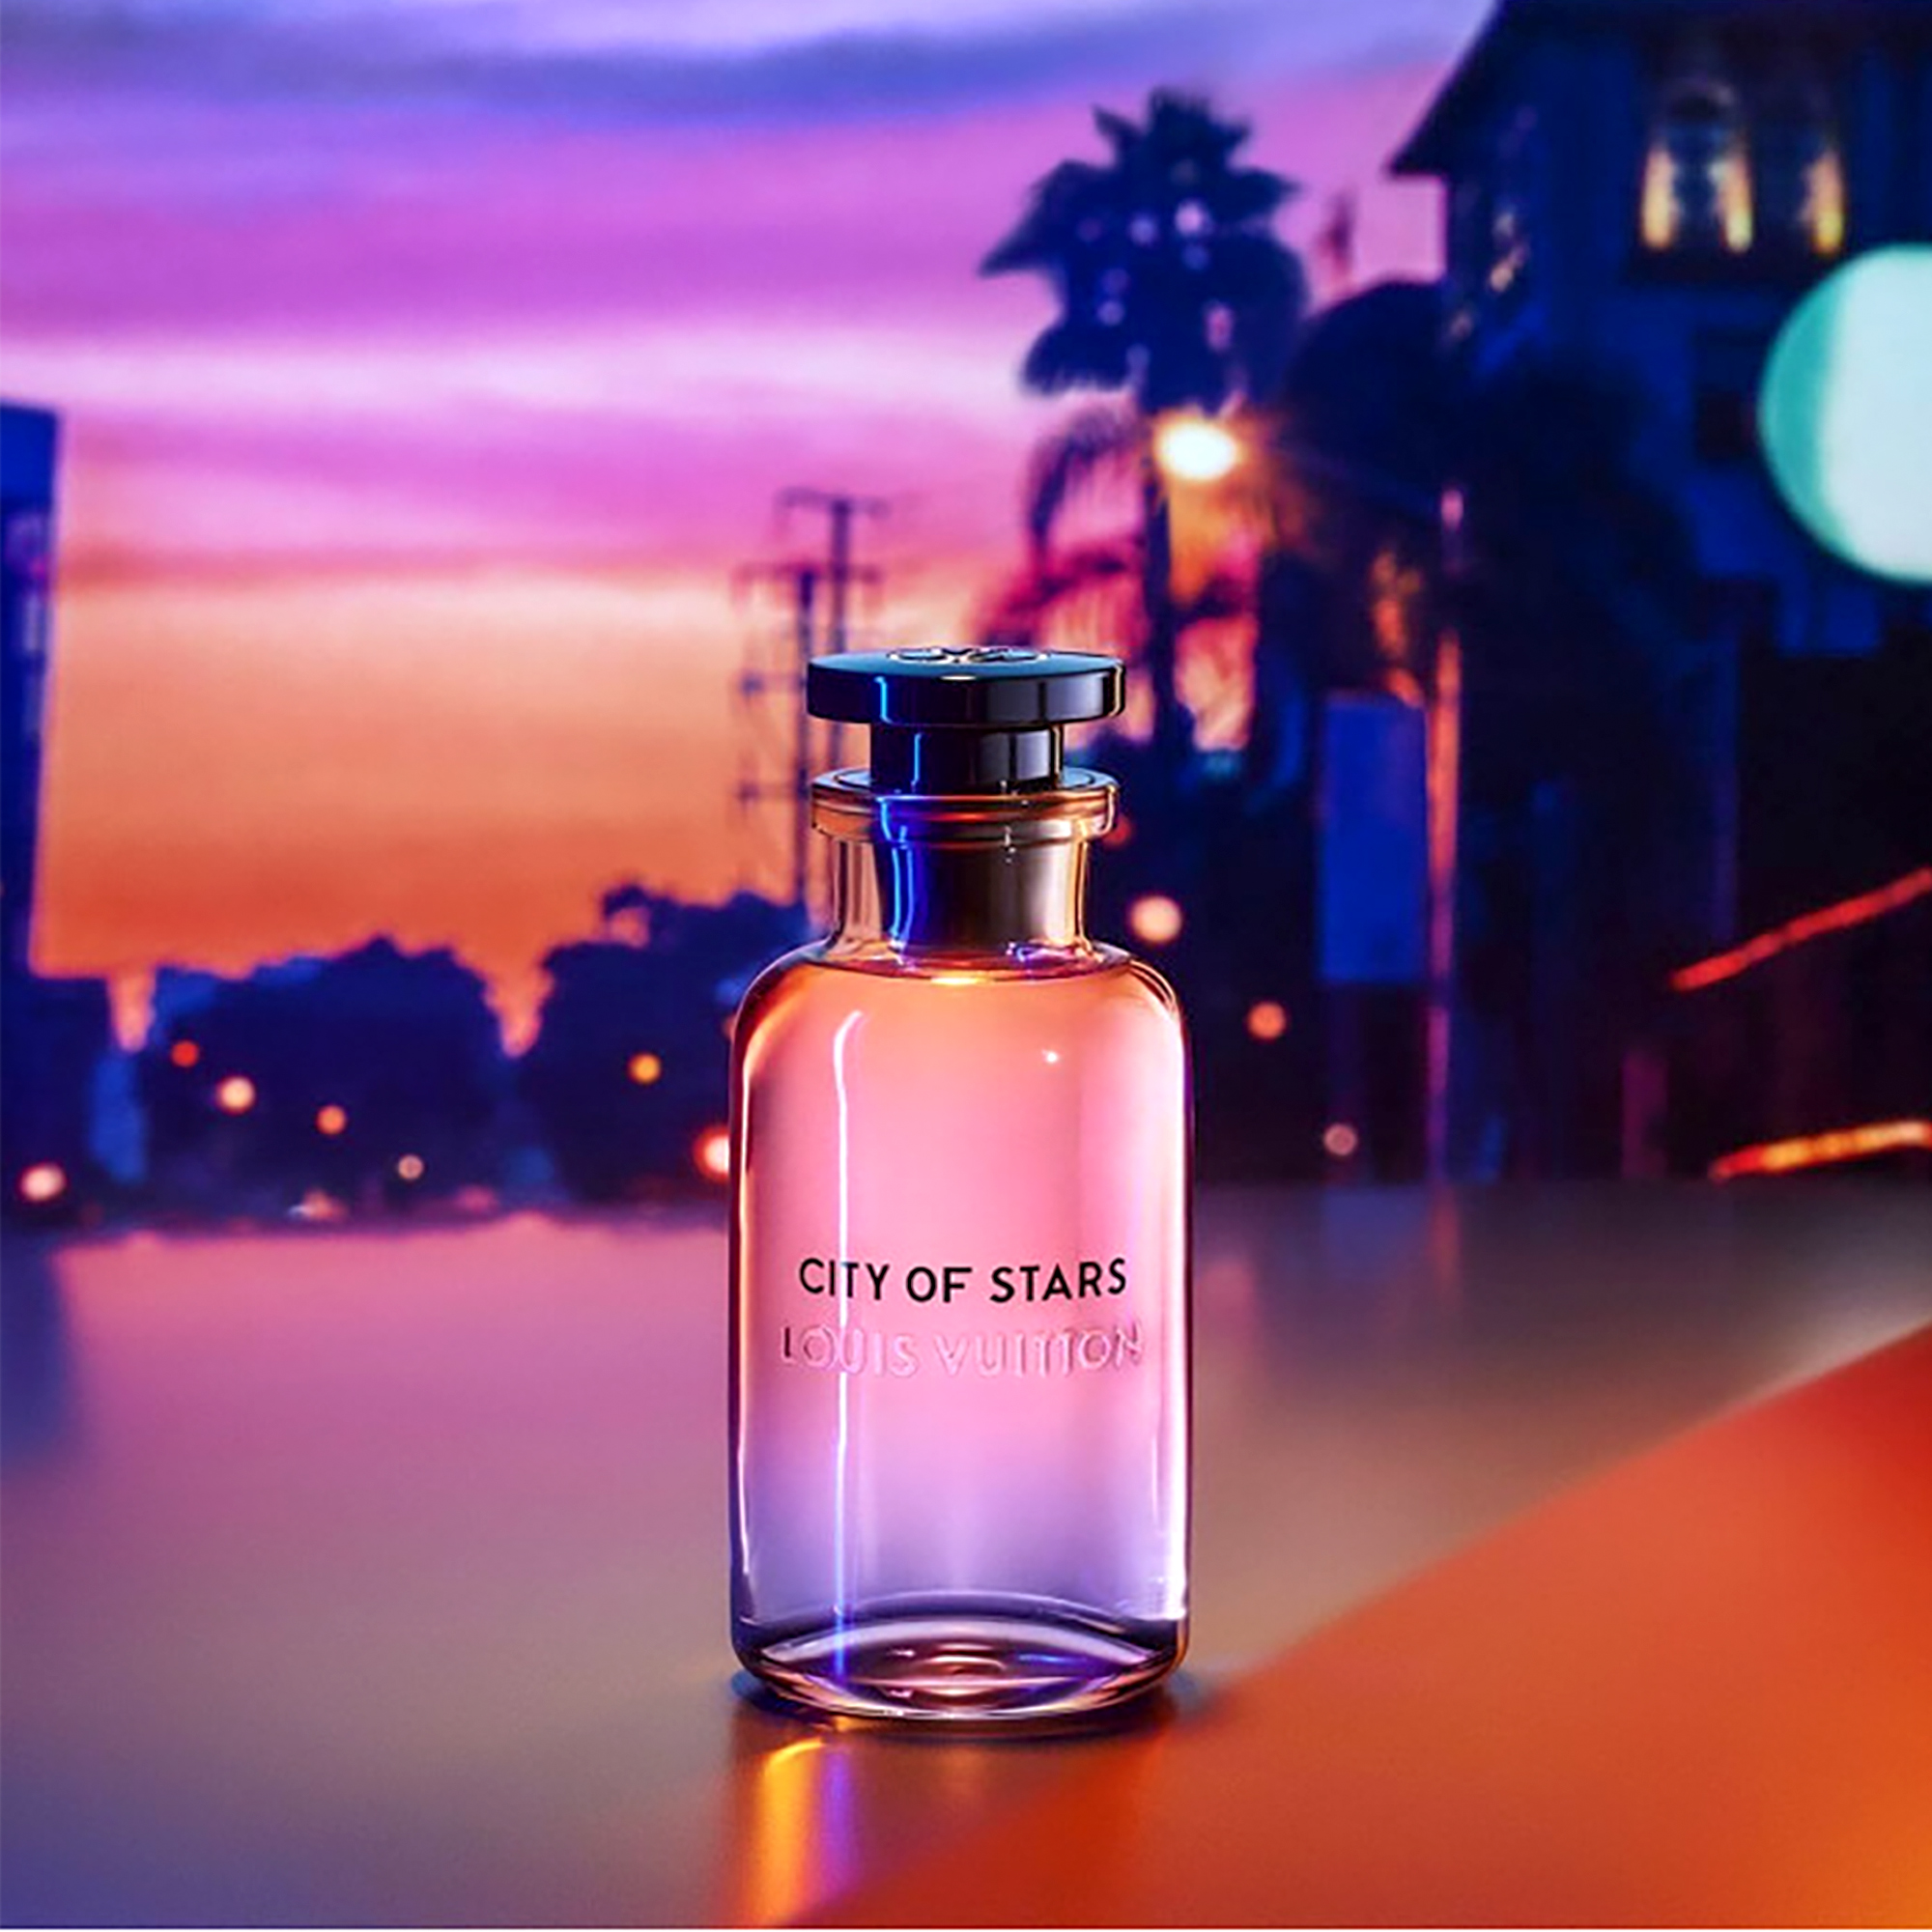 Louis Vuittons New City of Stars Fragrance Captures Los Angeles  Unpredictability